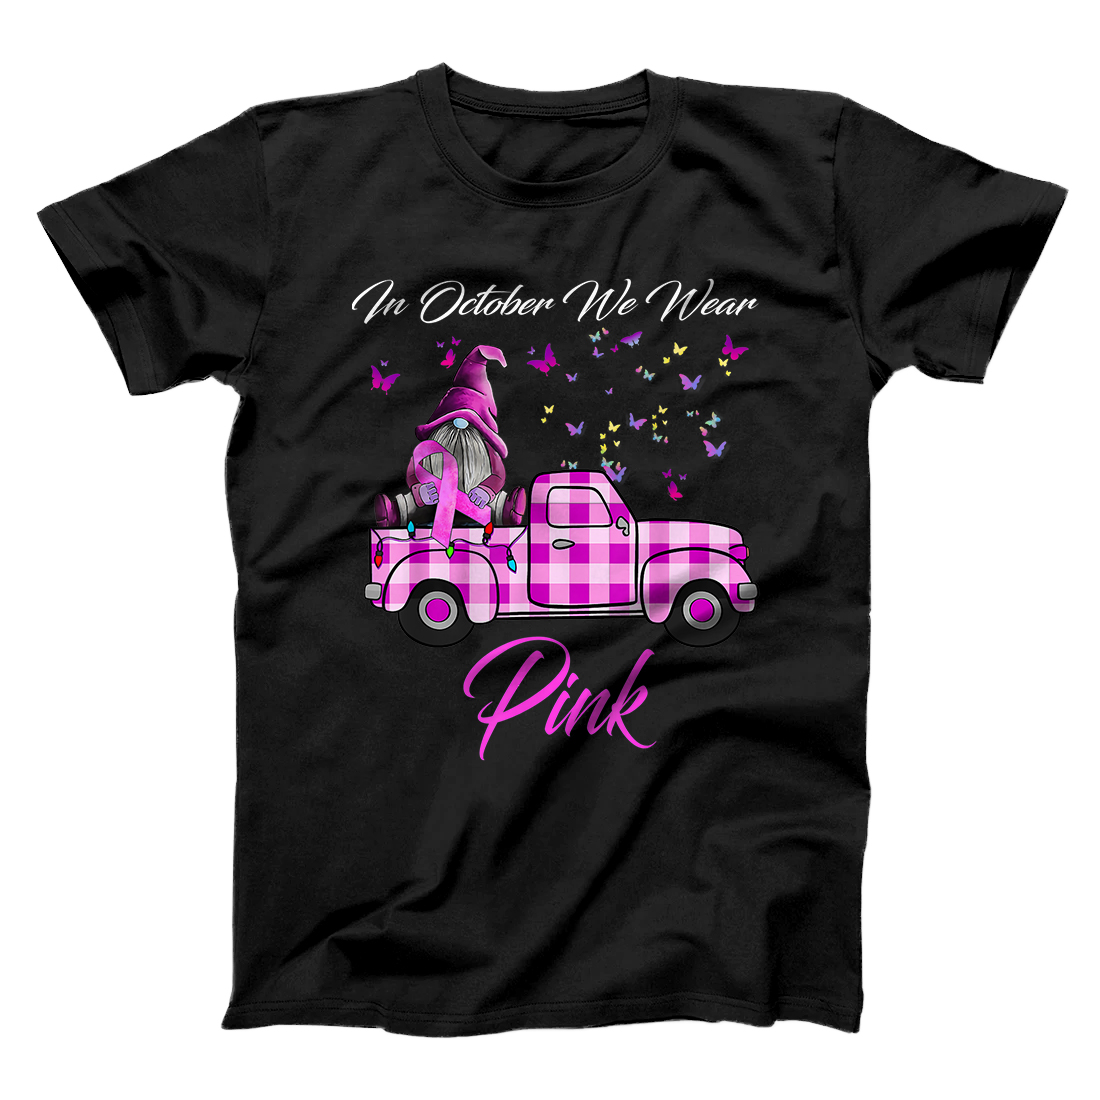 In October We Wear Pink Gnome Truck Breast Cancer Awareness T-Shirt